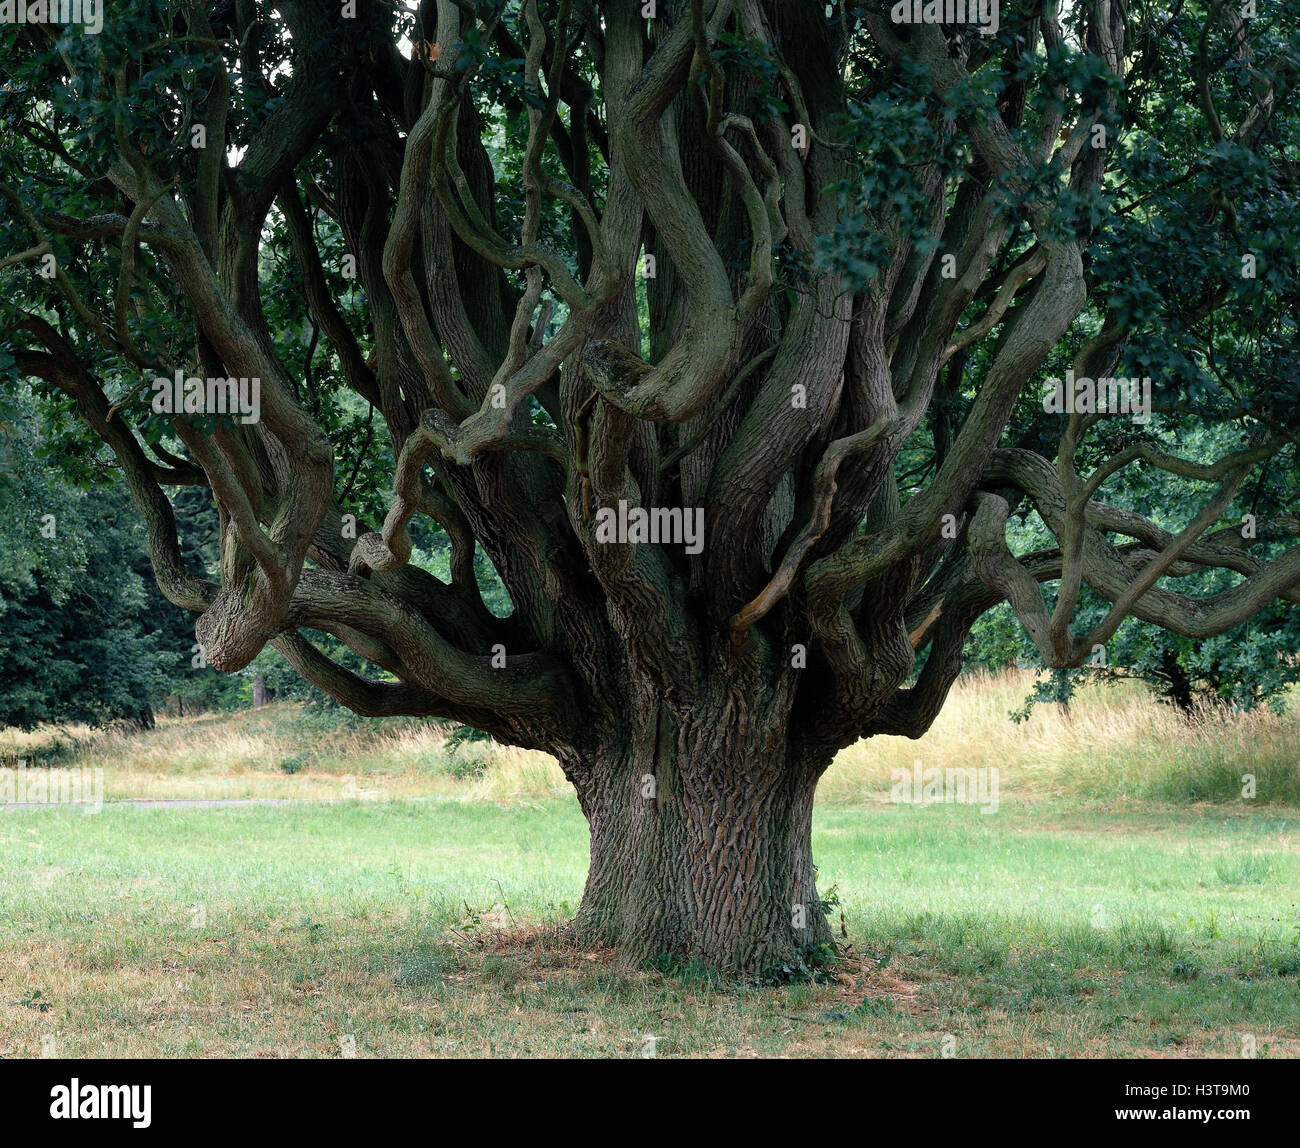 Oak, old, branches, sinuously, tree, broad-leaved tree, Quercus, beech family, trunk, strain, thickly, branches, curved, height form, Abnormally, nature, plant Stock Photo